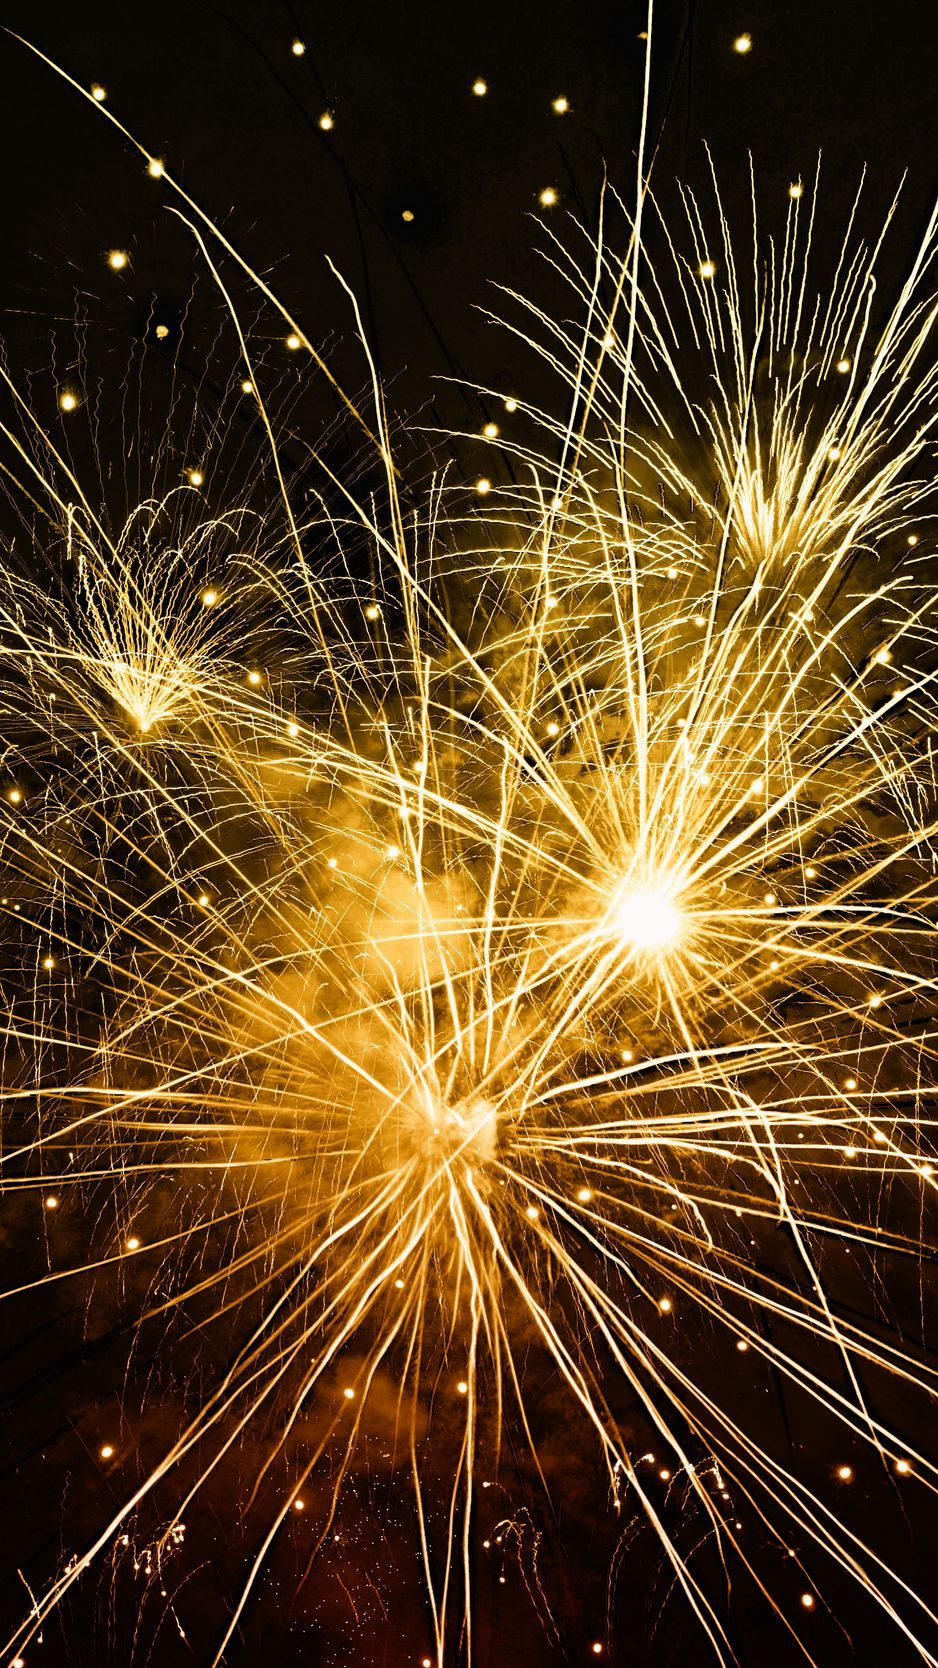 Download wallpaper 938x1668 fireworks, holiday, sparks, rays